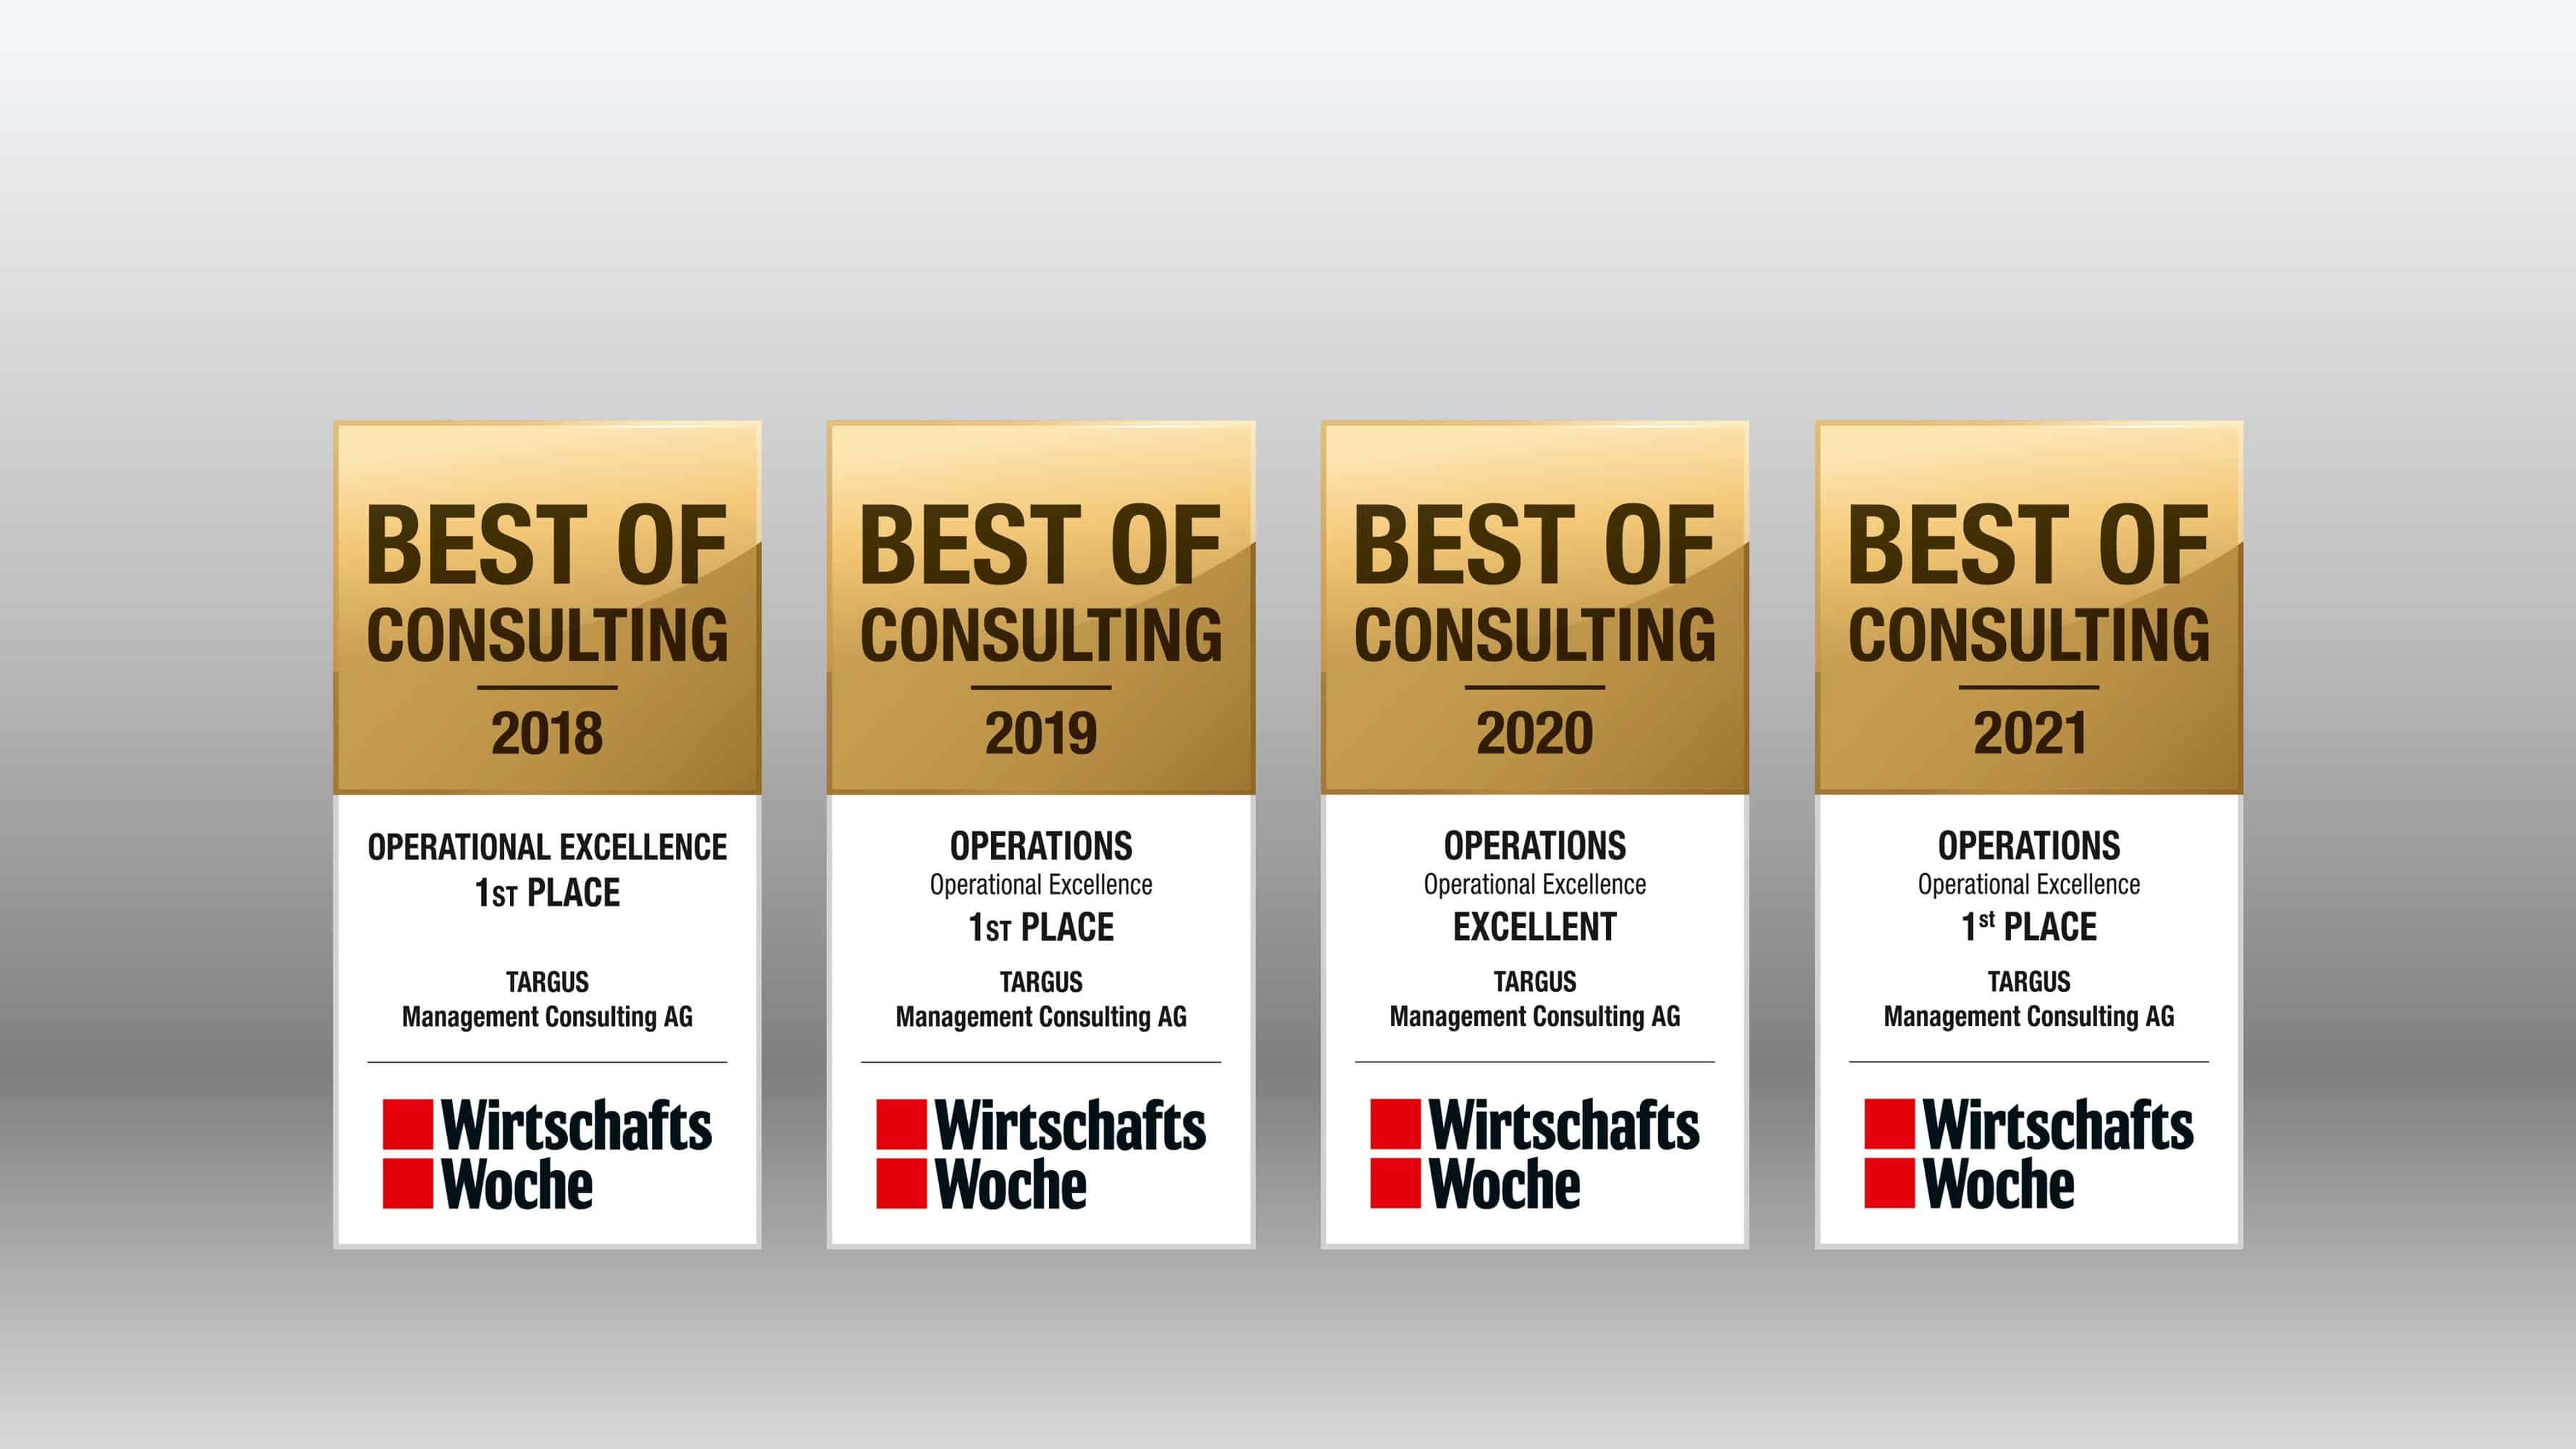 211126 Boc Bild englisch 2 - Best of Consulting - TARGUS is awarded for the fourth year in a row